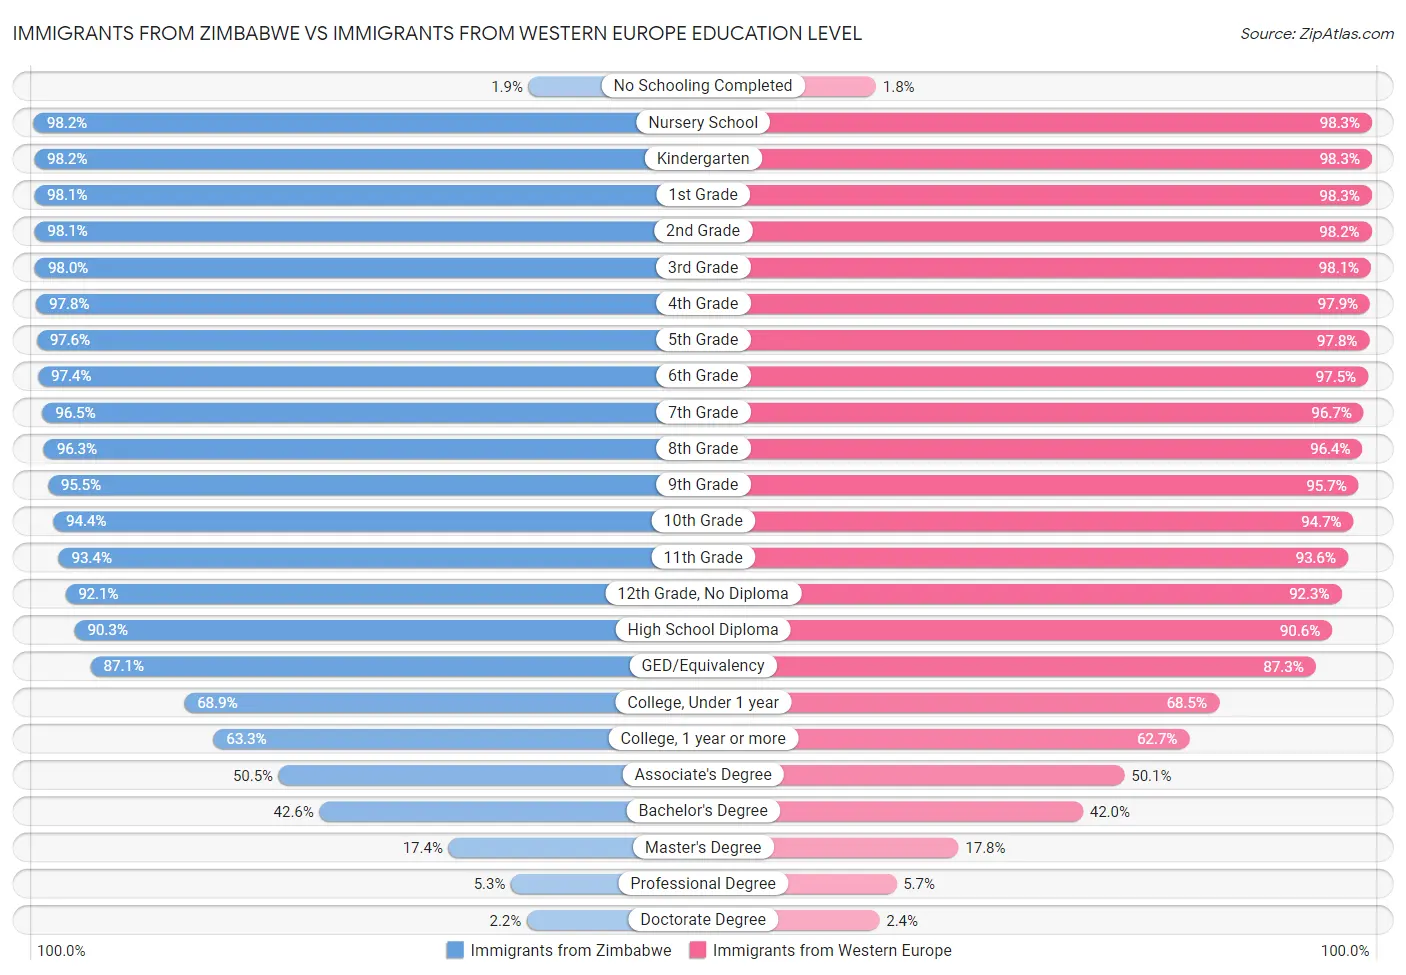 Immigrants from Zimbabwe vs Immigrants from Western Europe Education Level